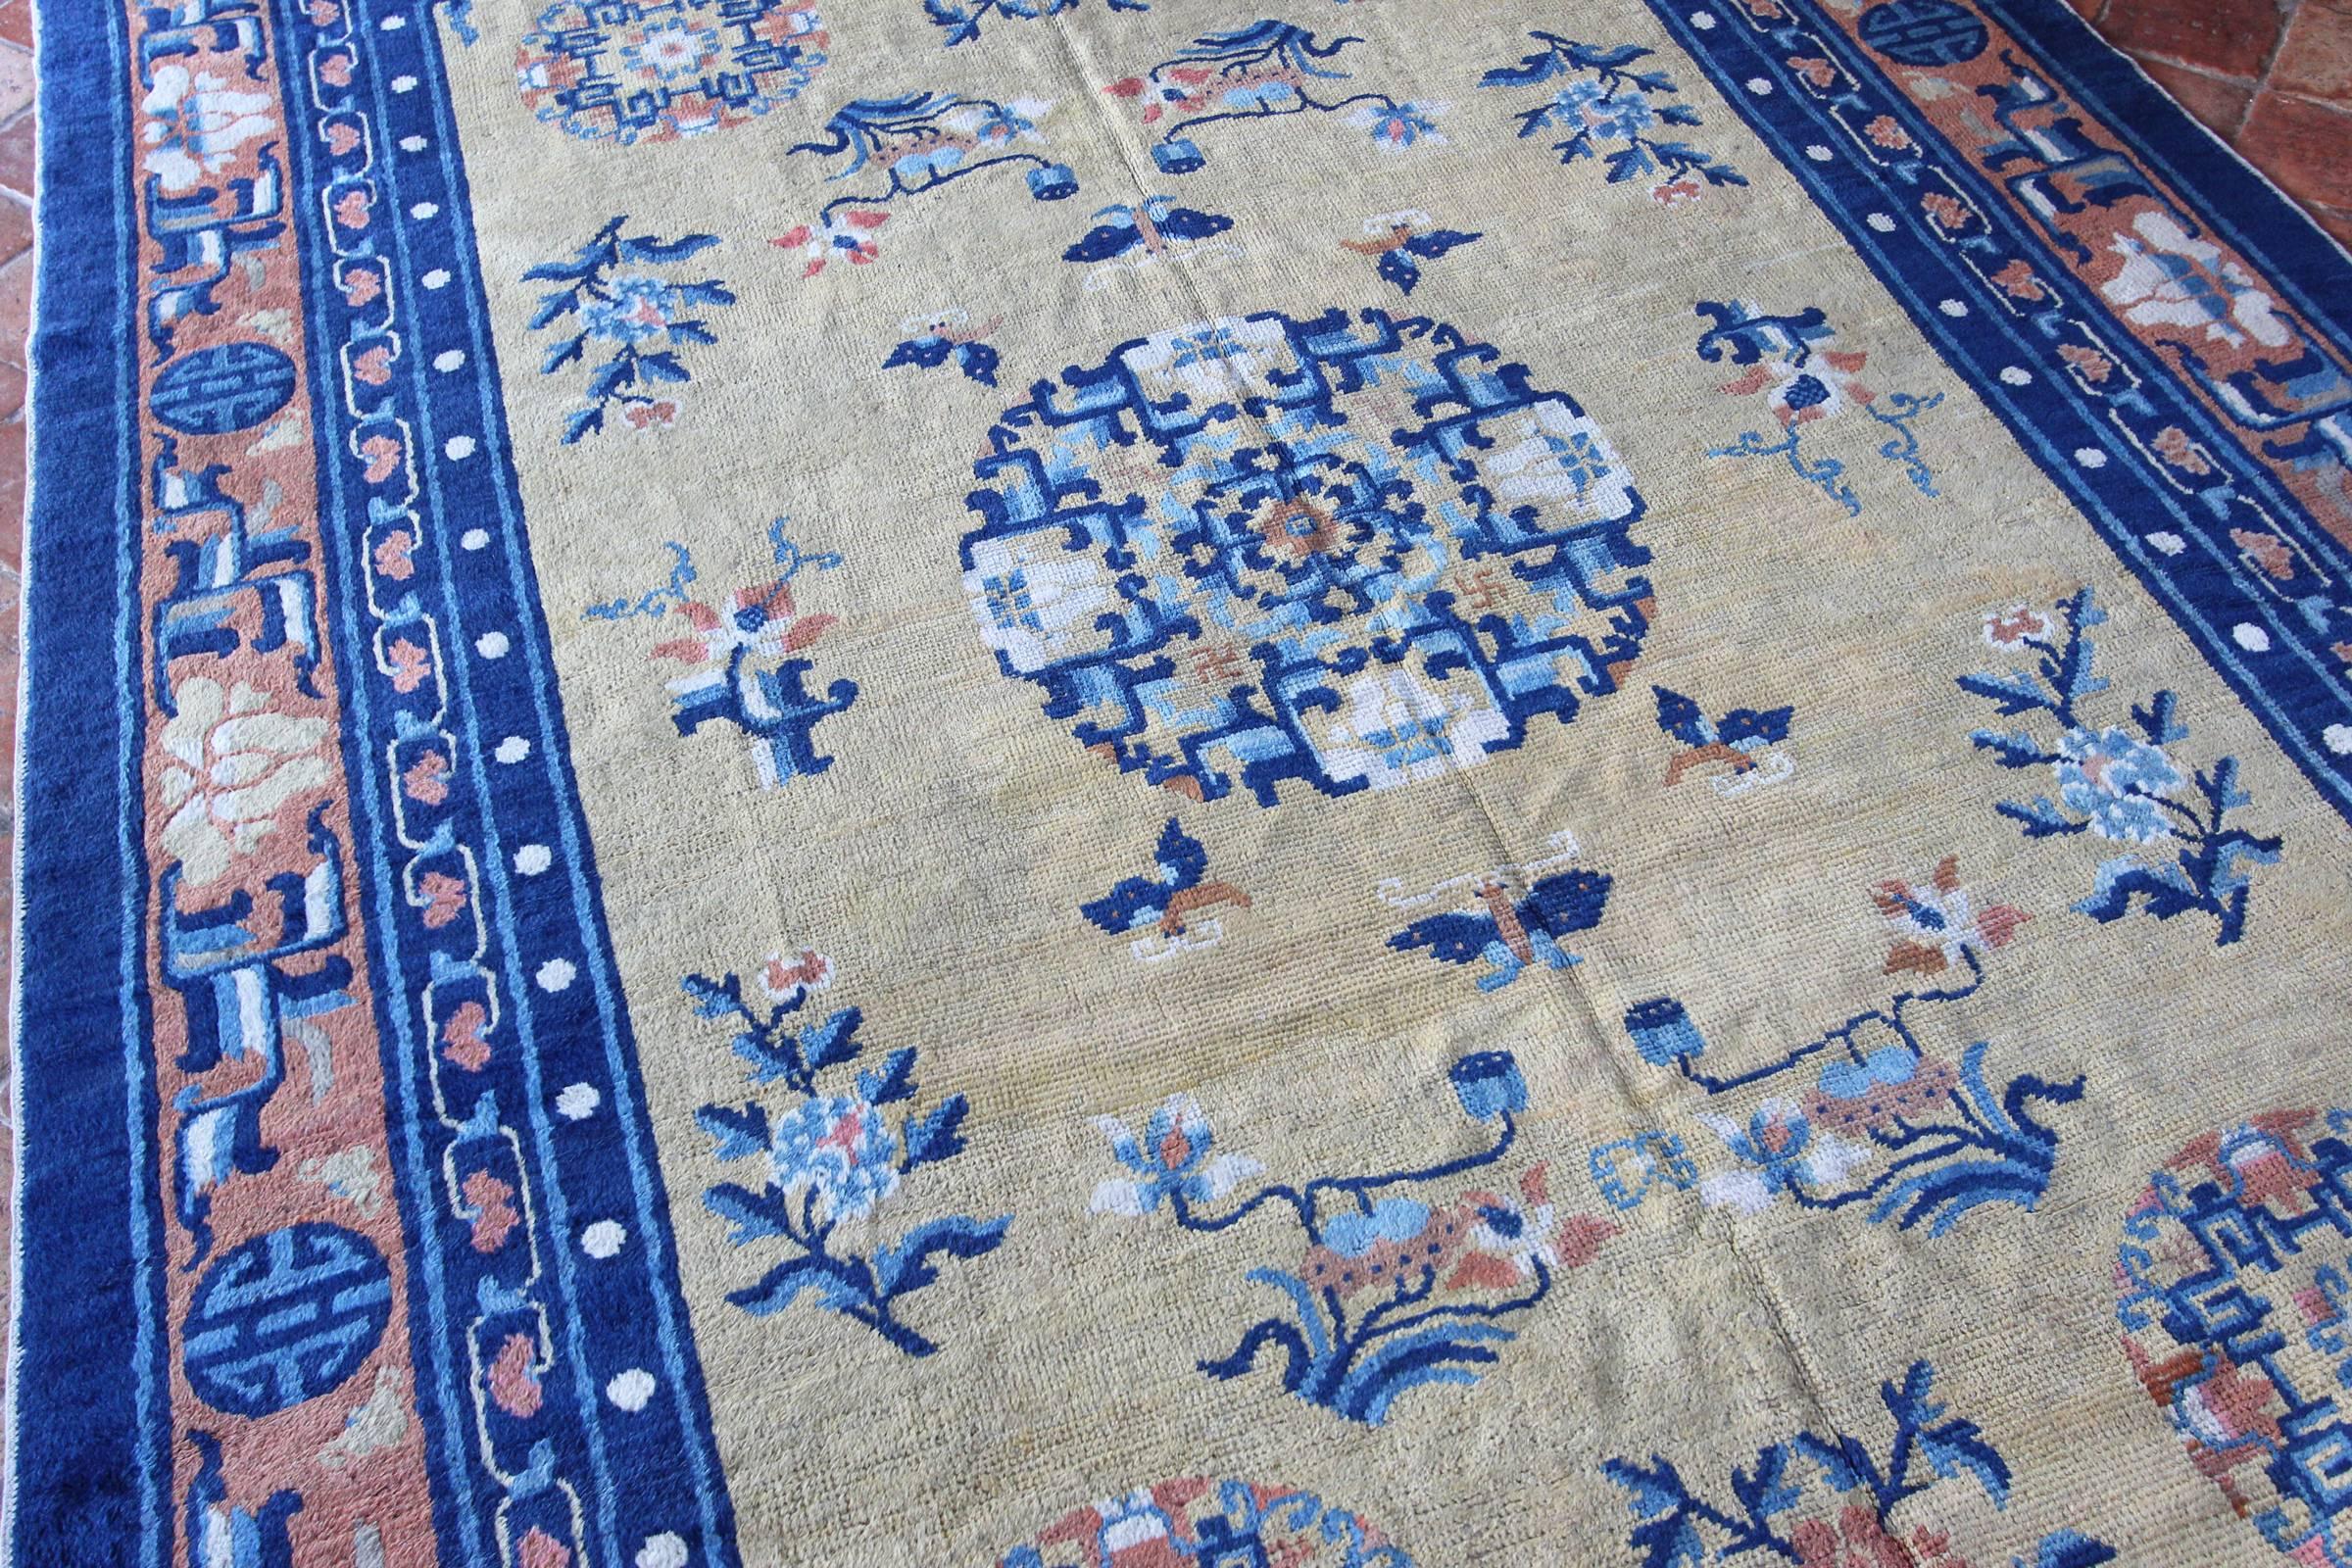 A fabulous antique Chinese Ningxia carpet. Ningxia rugs are among the very oldest antique rugs from China, as their style has remained consistently popular since at least the eighteenth century and possibly quite a bit earlier. Ningxia rugs are